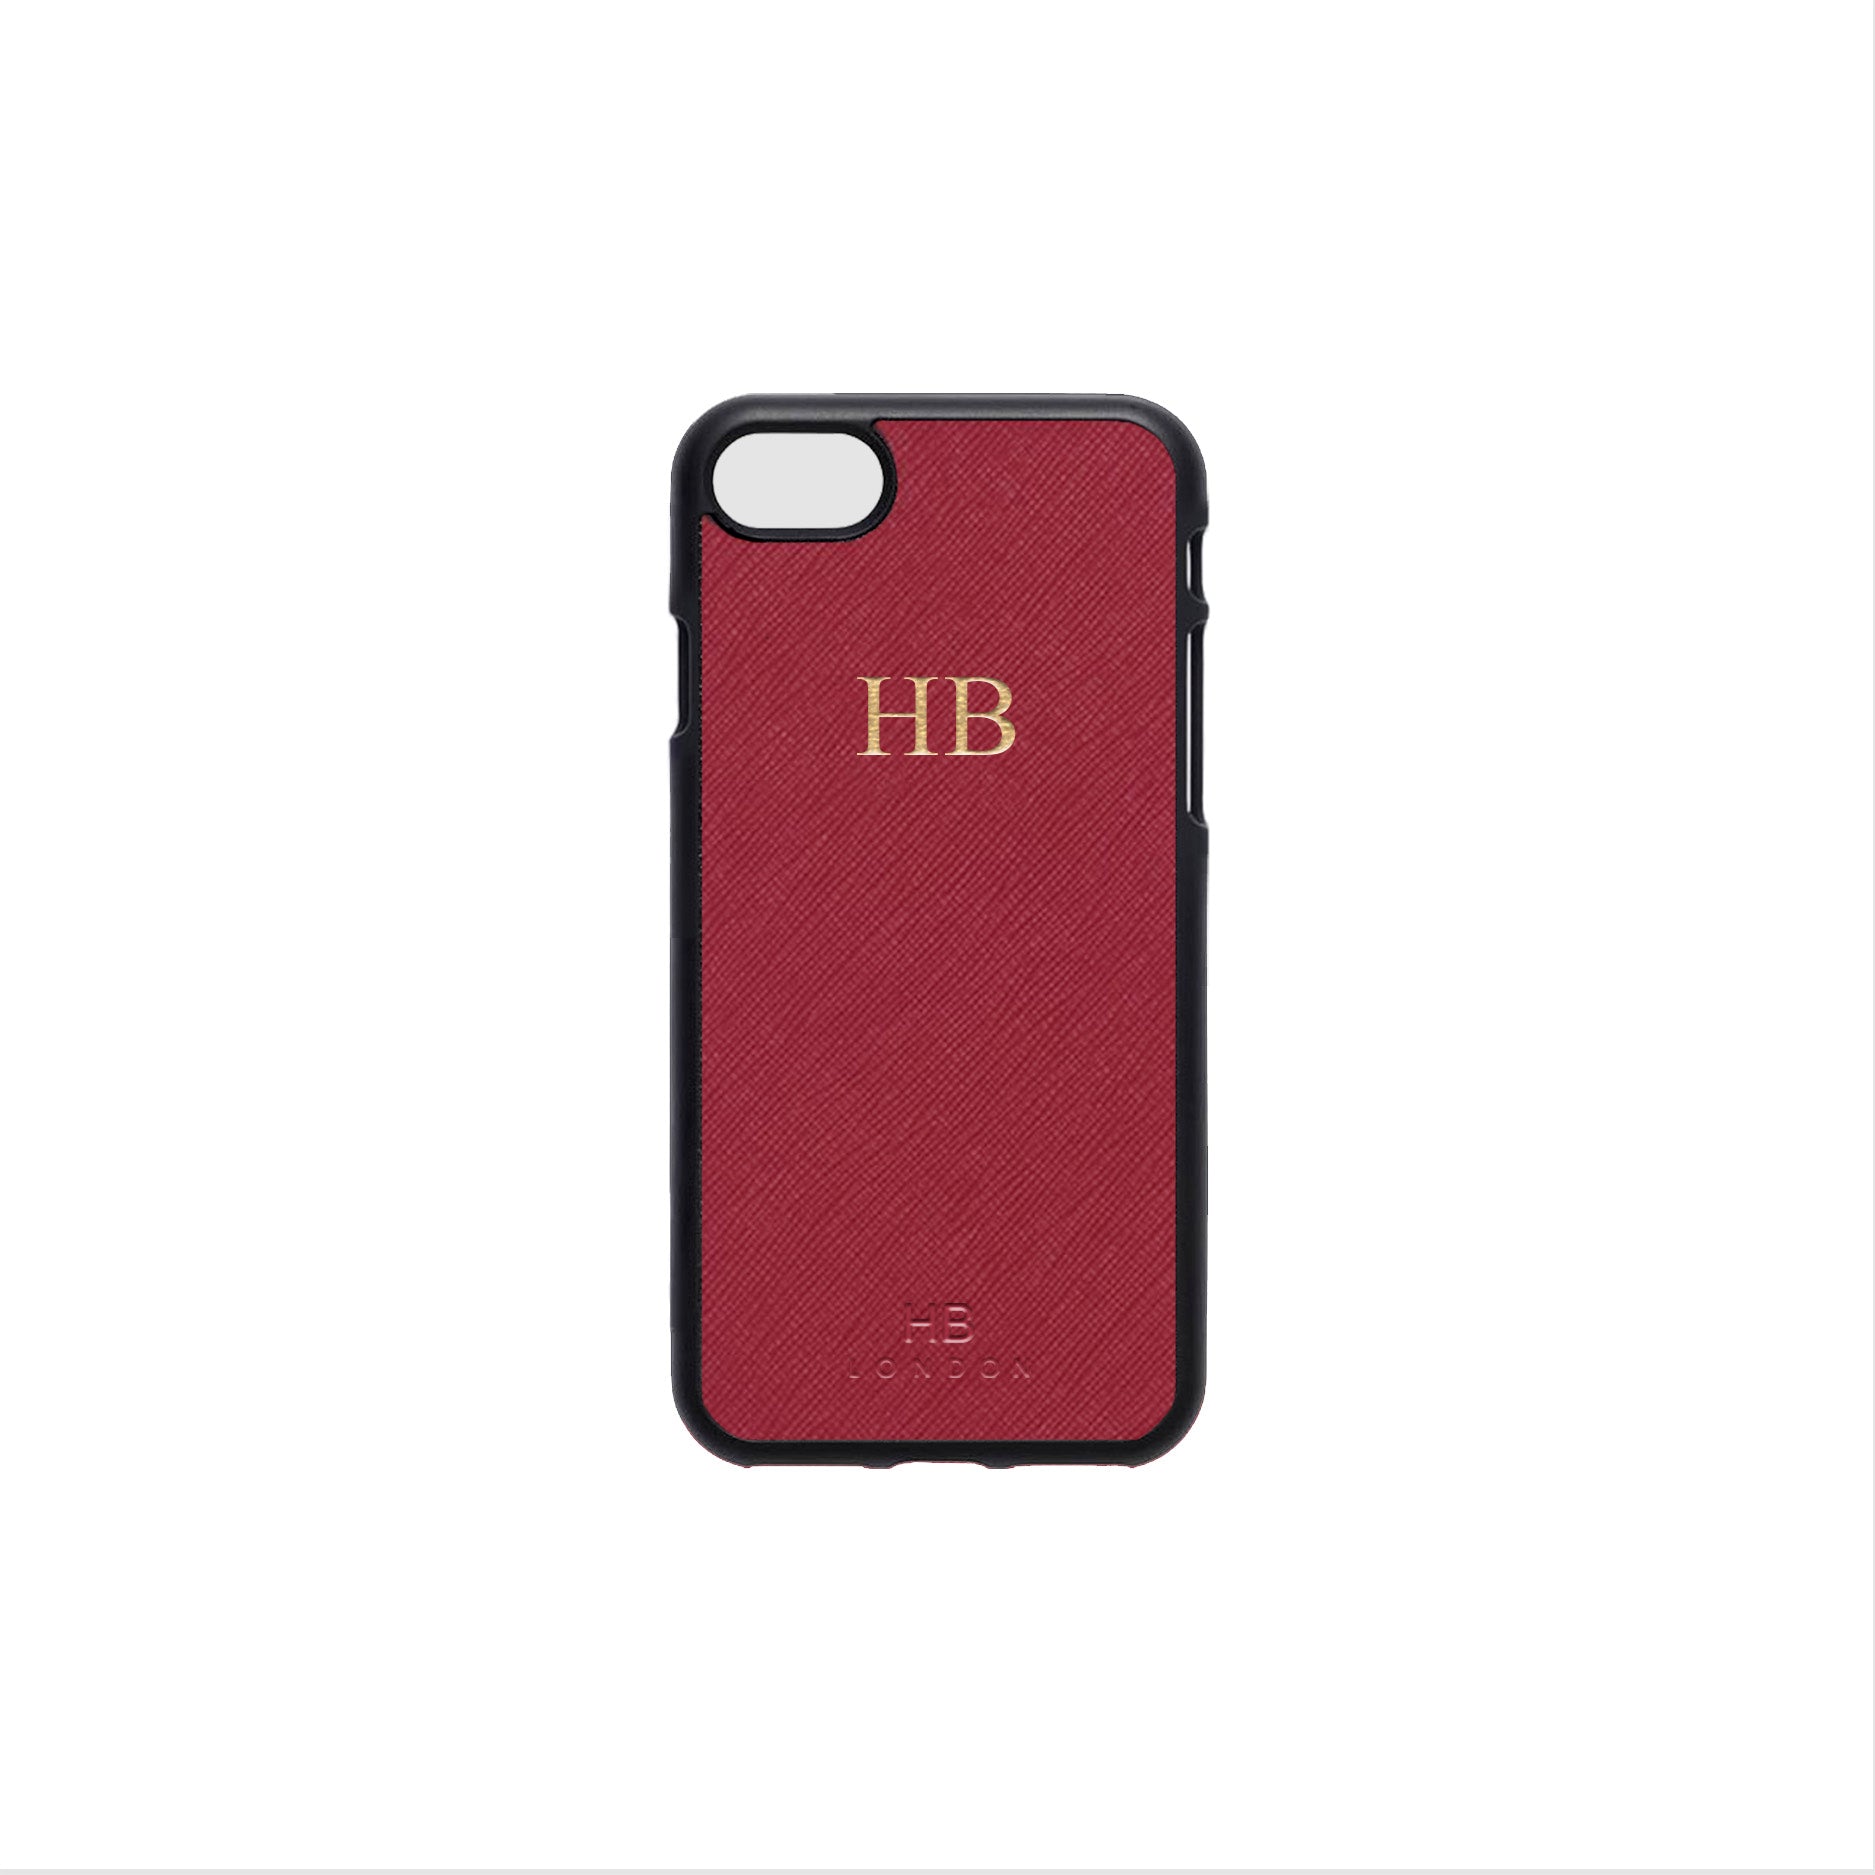 Cherry Red Saffiano Leather iPhone7/8 Phone Case - HB LONDON